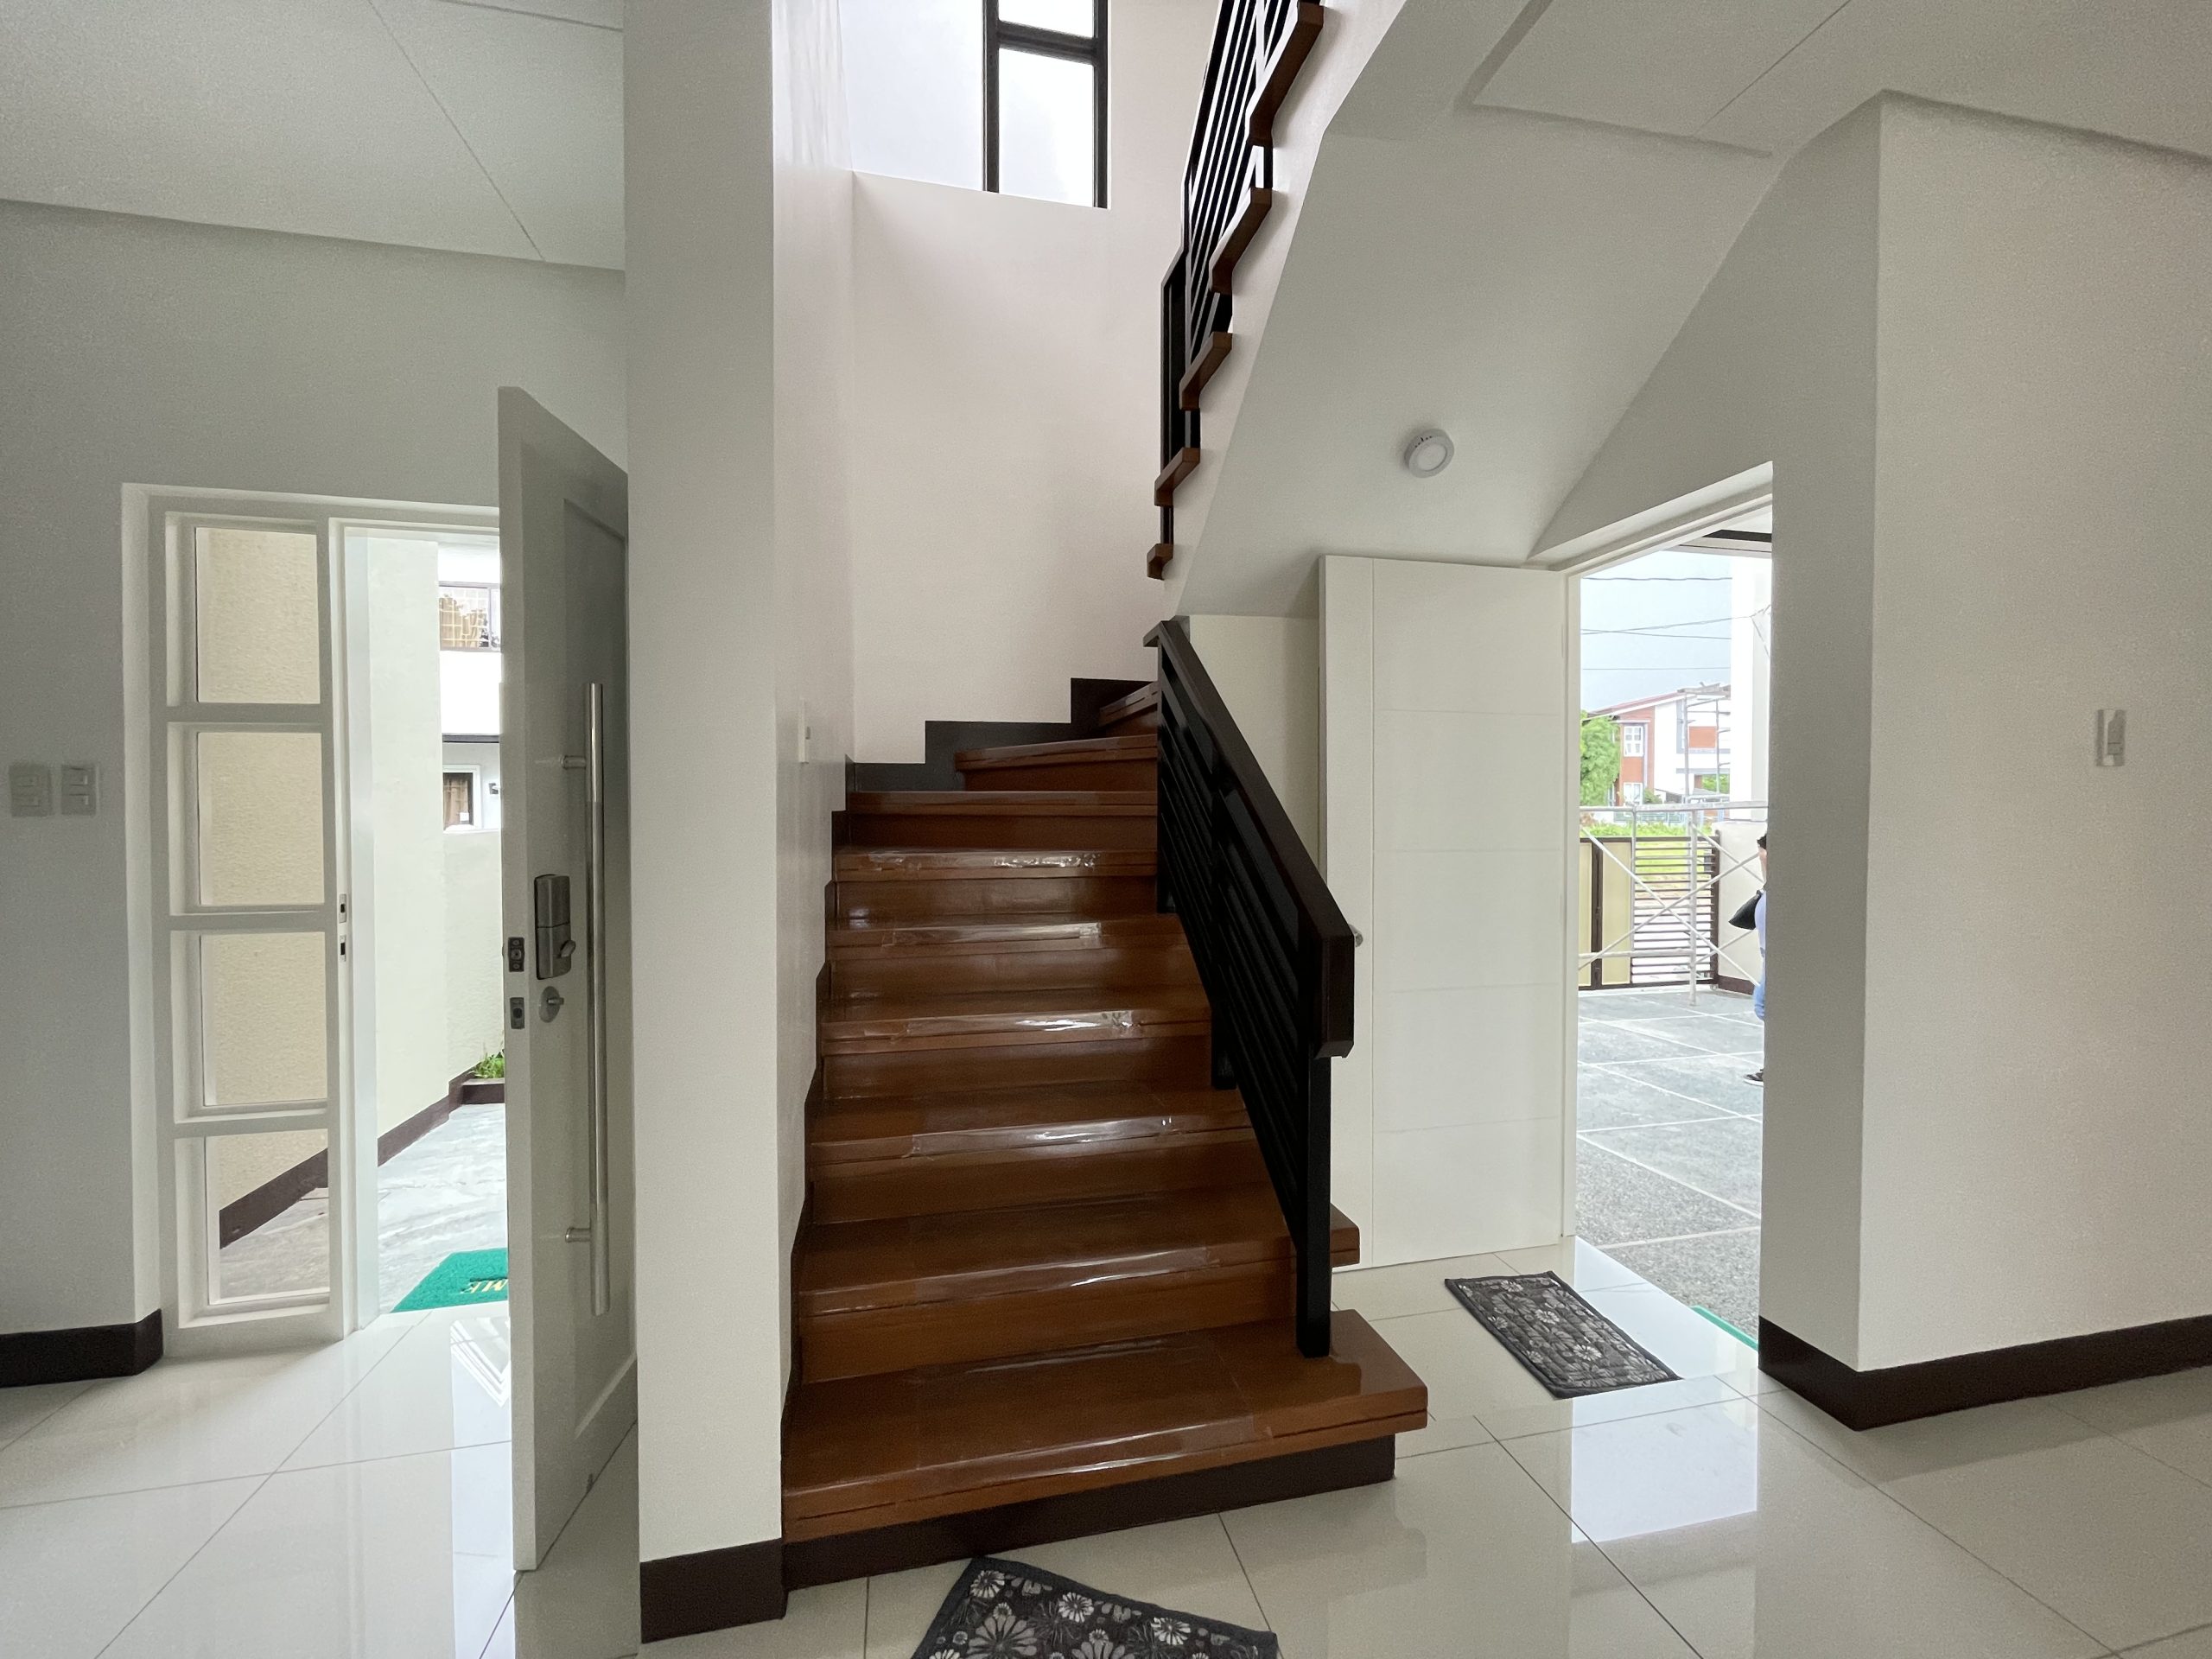 4 BR Captivating Brand  New House and Lot at the Parkplace Village anabu, Imus, Cavite